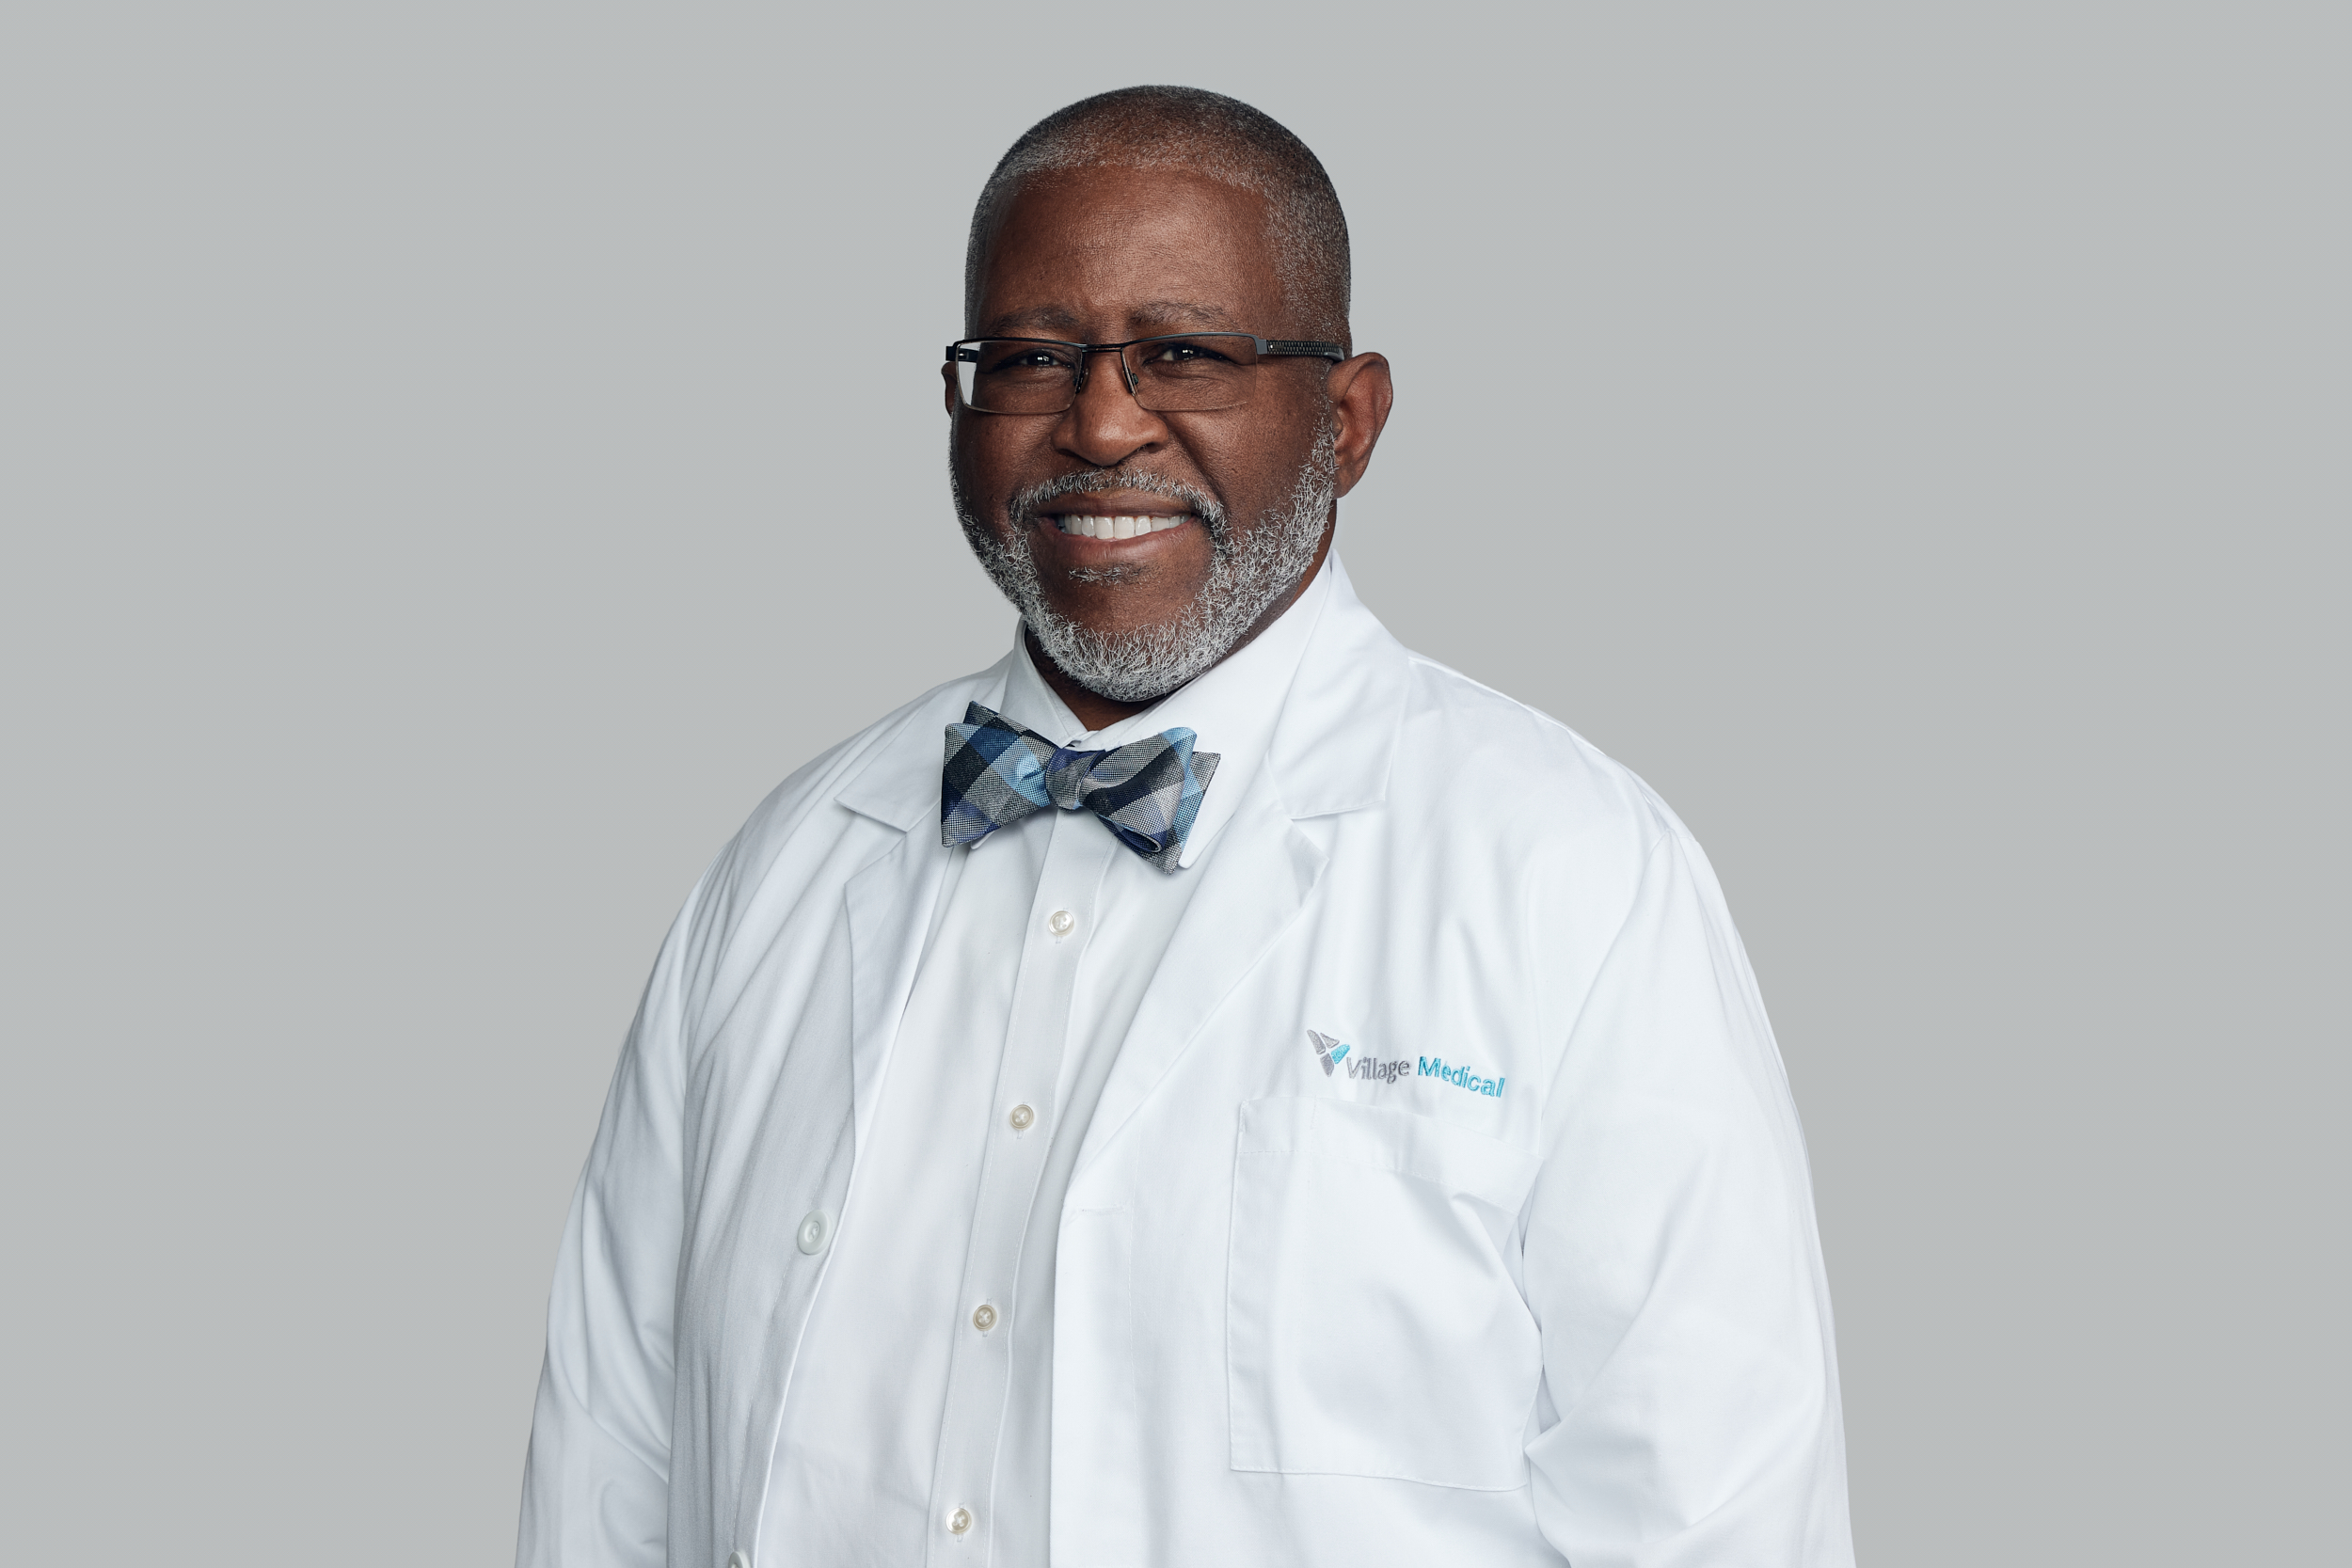 Professional headshot of Clyde Watkins, MD